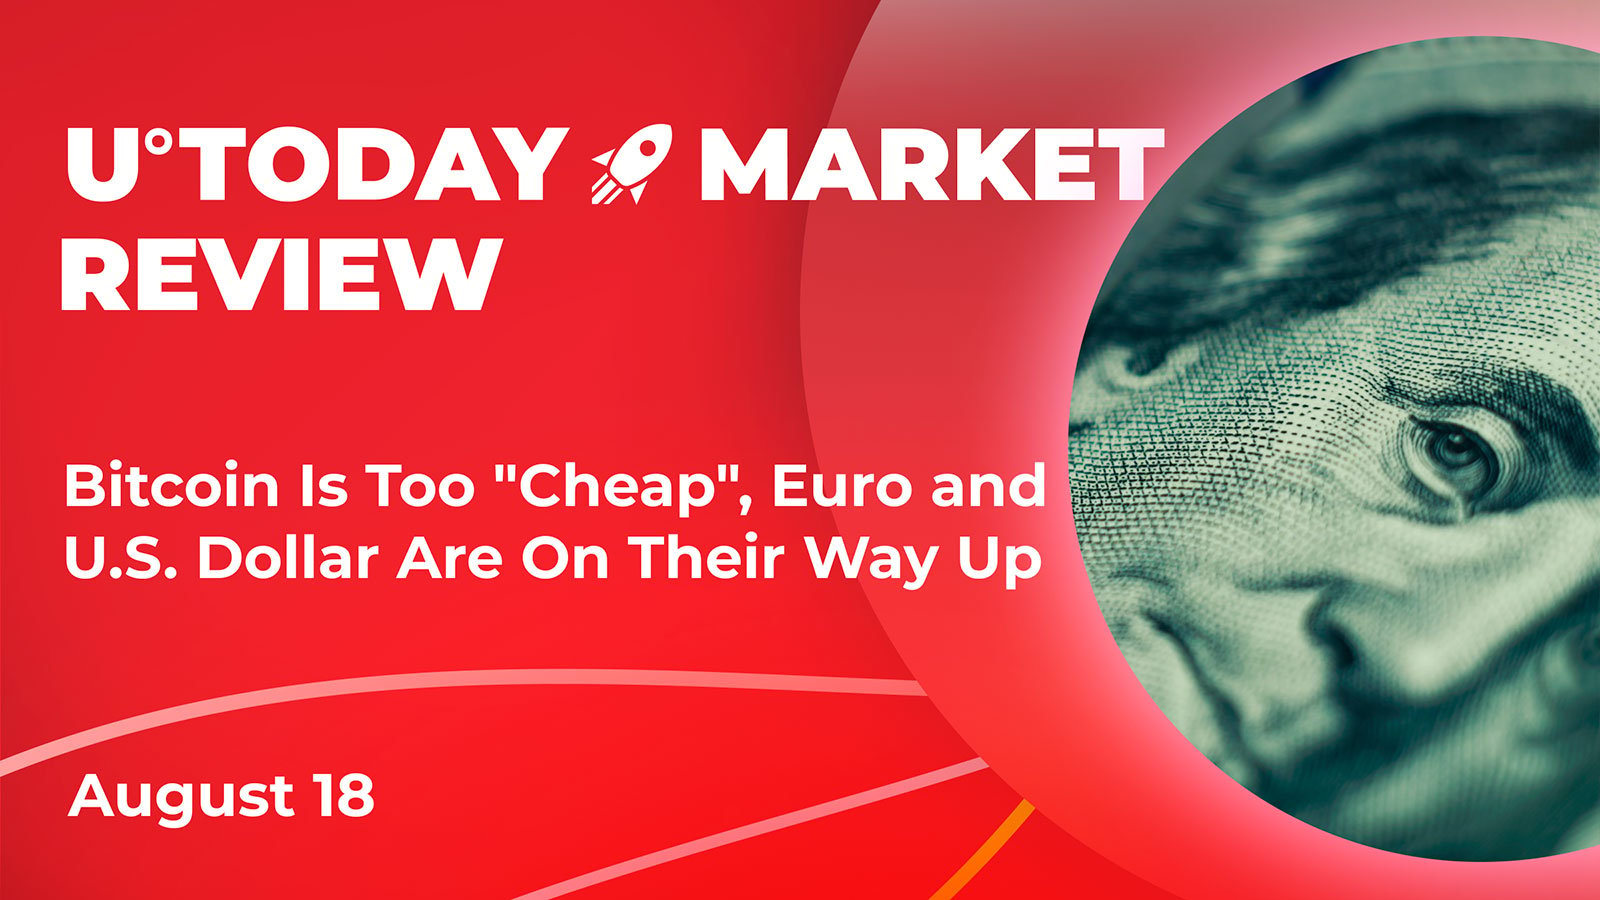 Bitcoin Is Too "Cheap," Euro and U.S. Dollar Are on Their Way up: Crypto Market Review, August 18